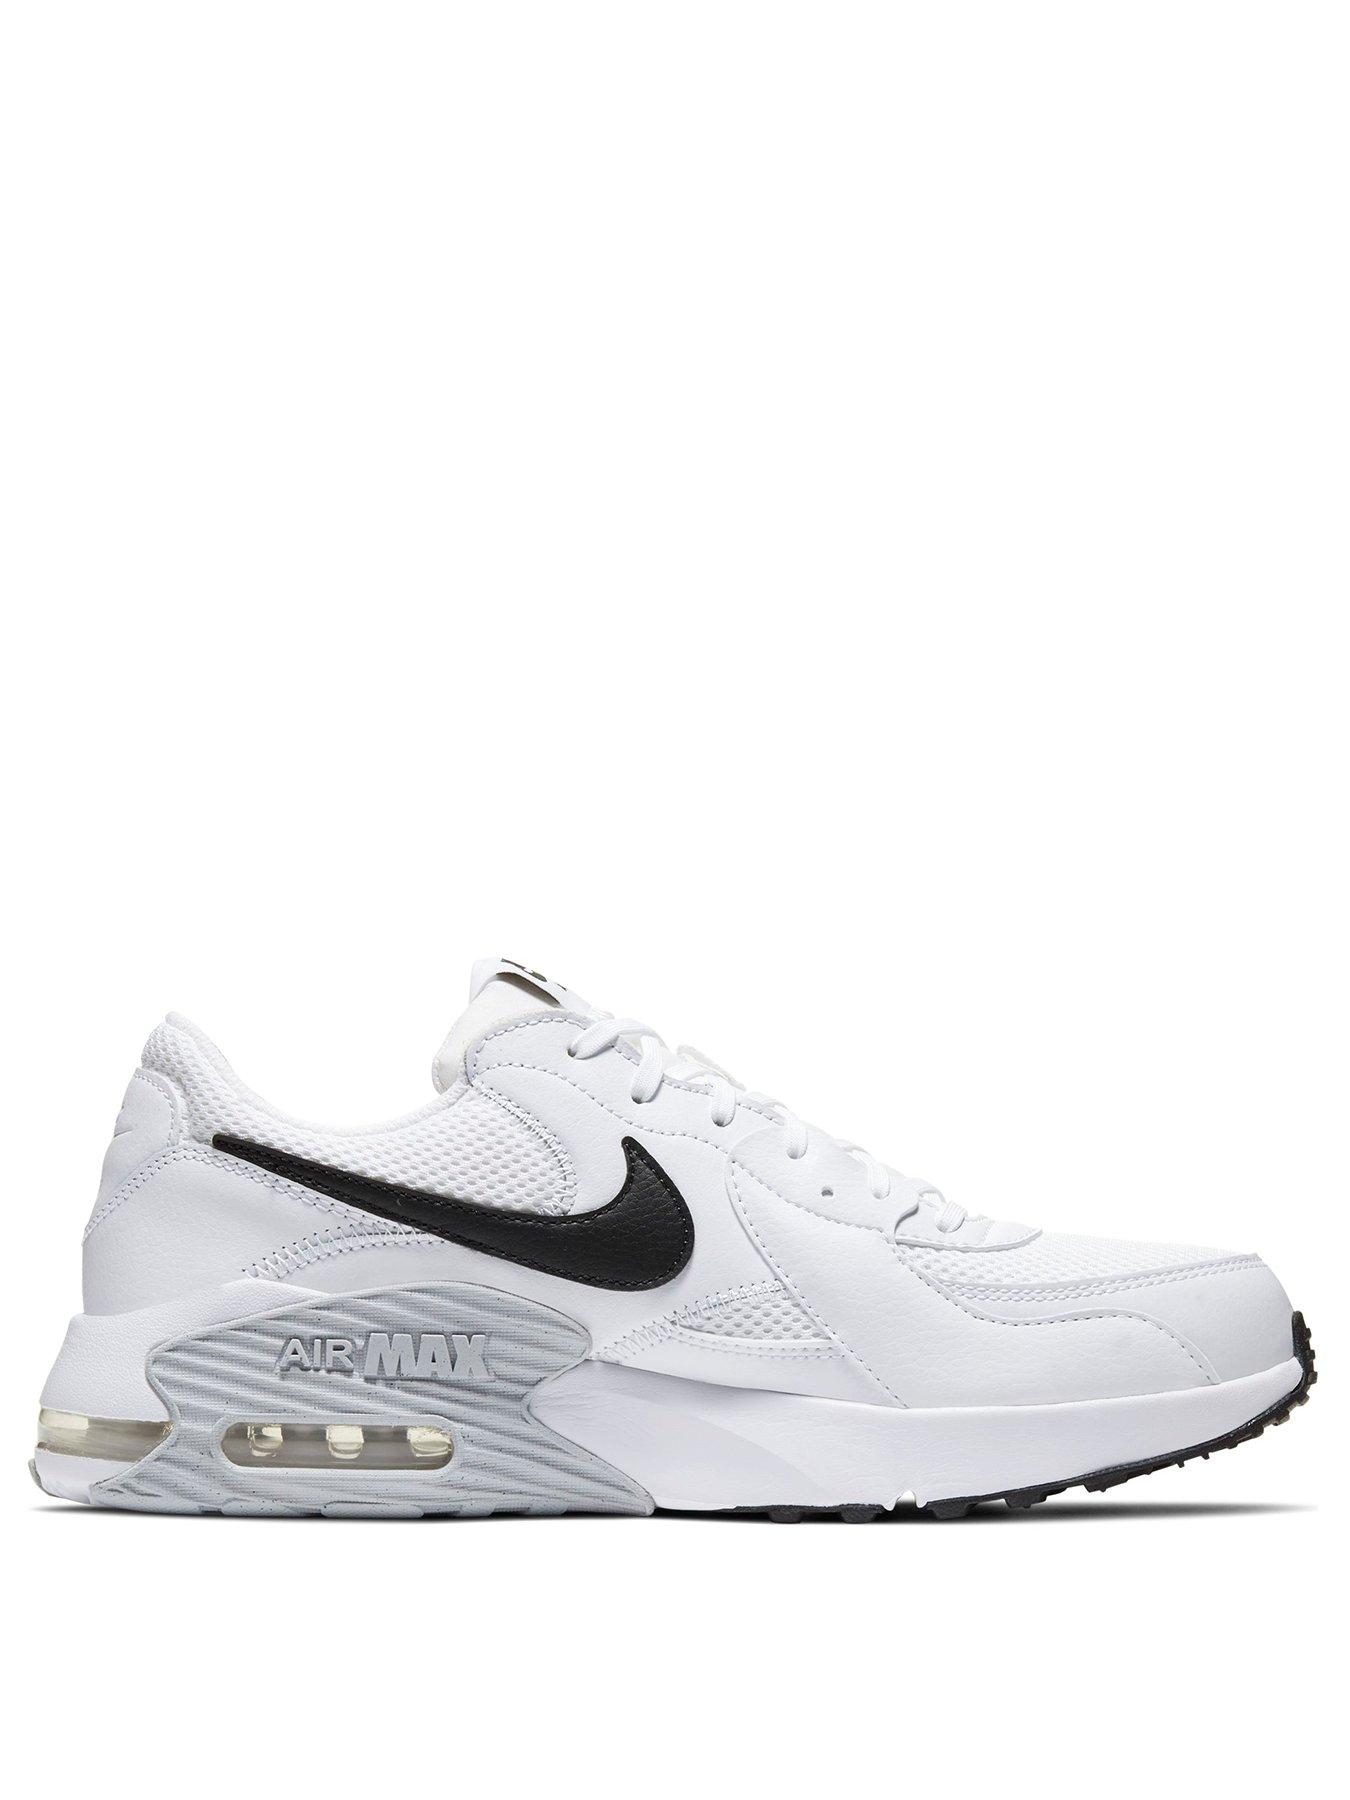 nike air max excee mens black and white